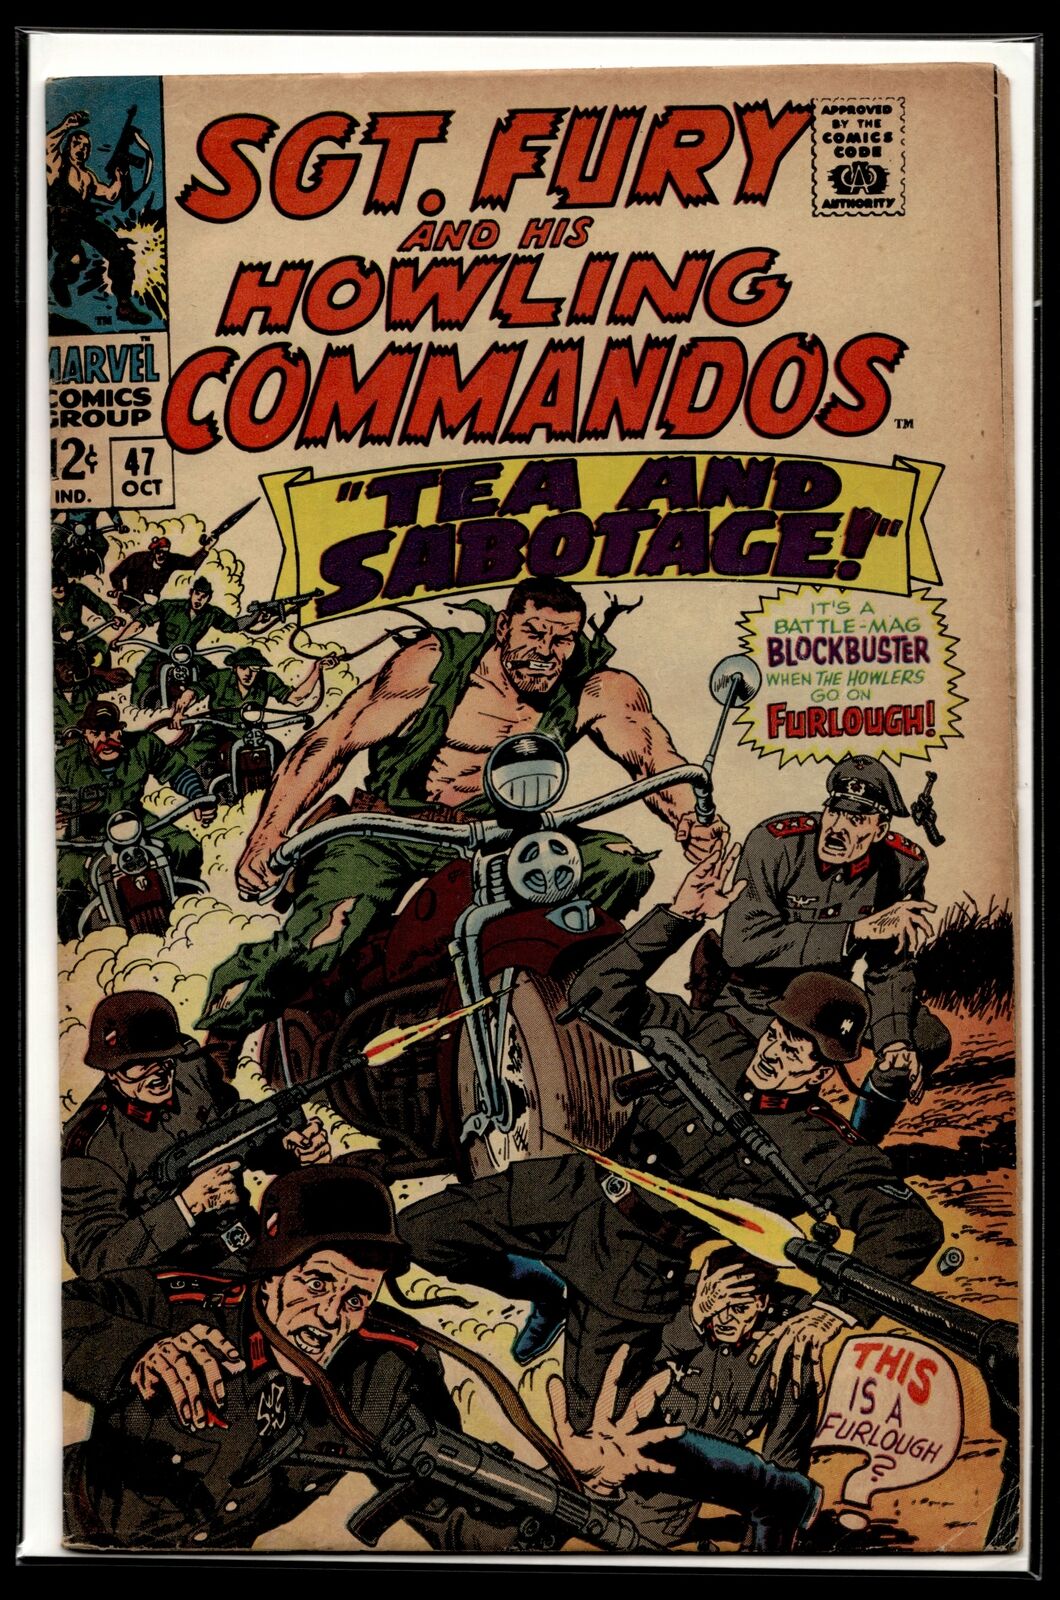 1967 Sgt. Fury and His Howling Commandos #47 Marvel Comic